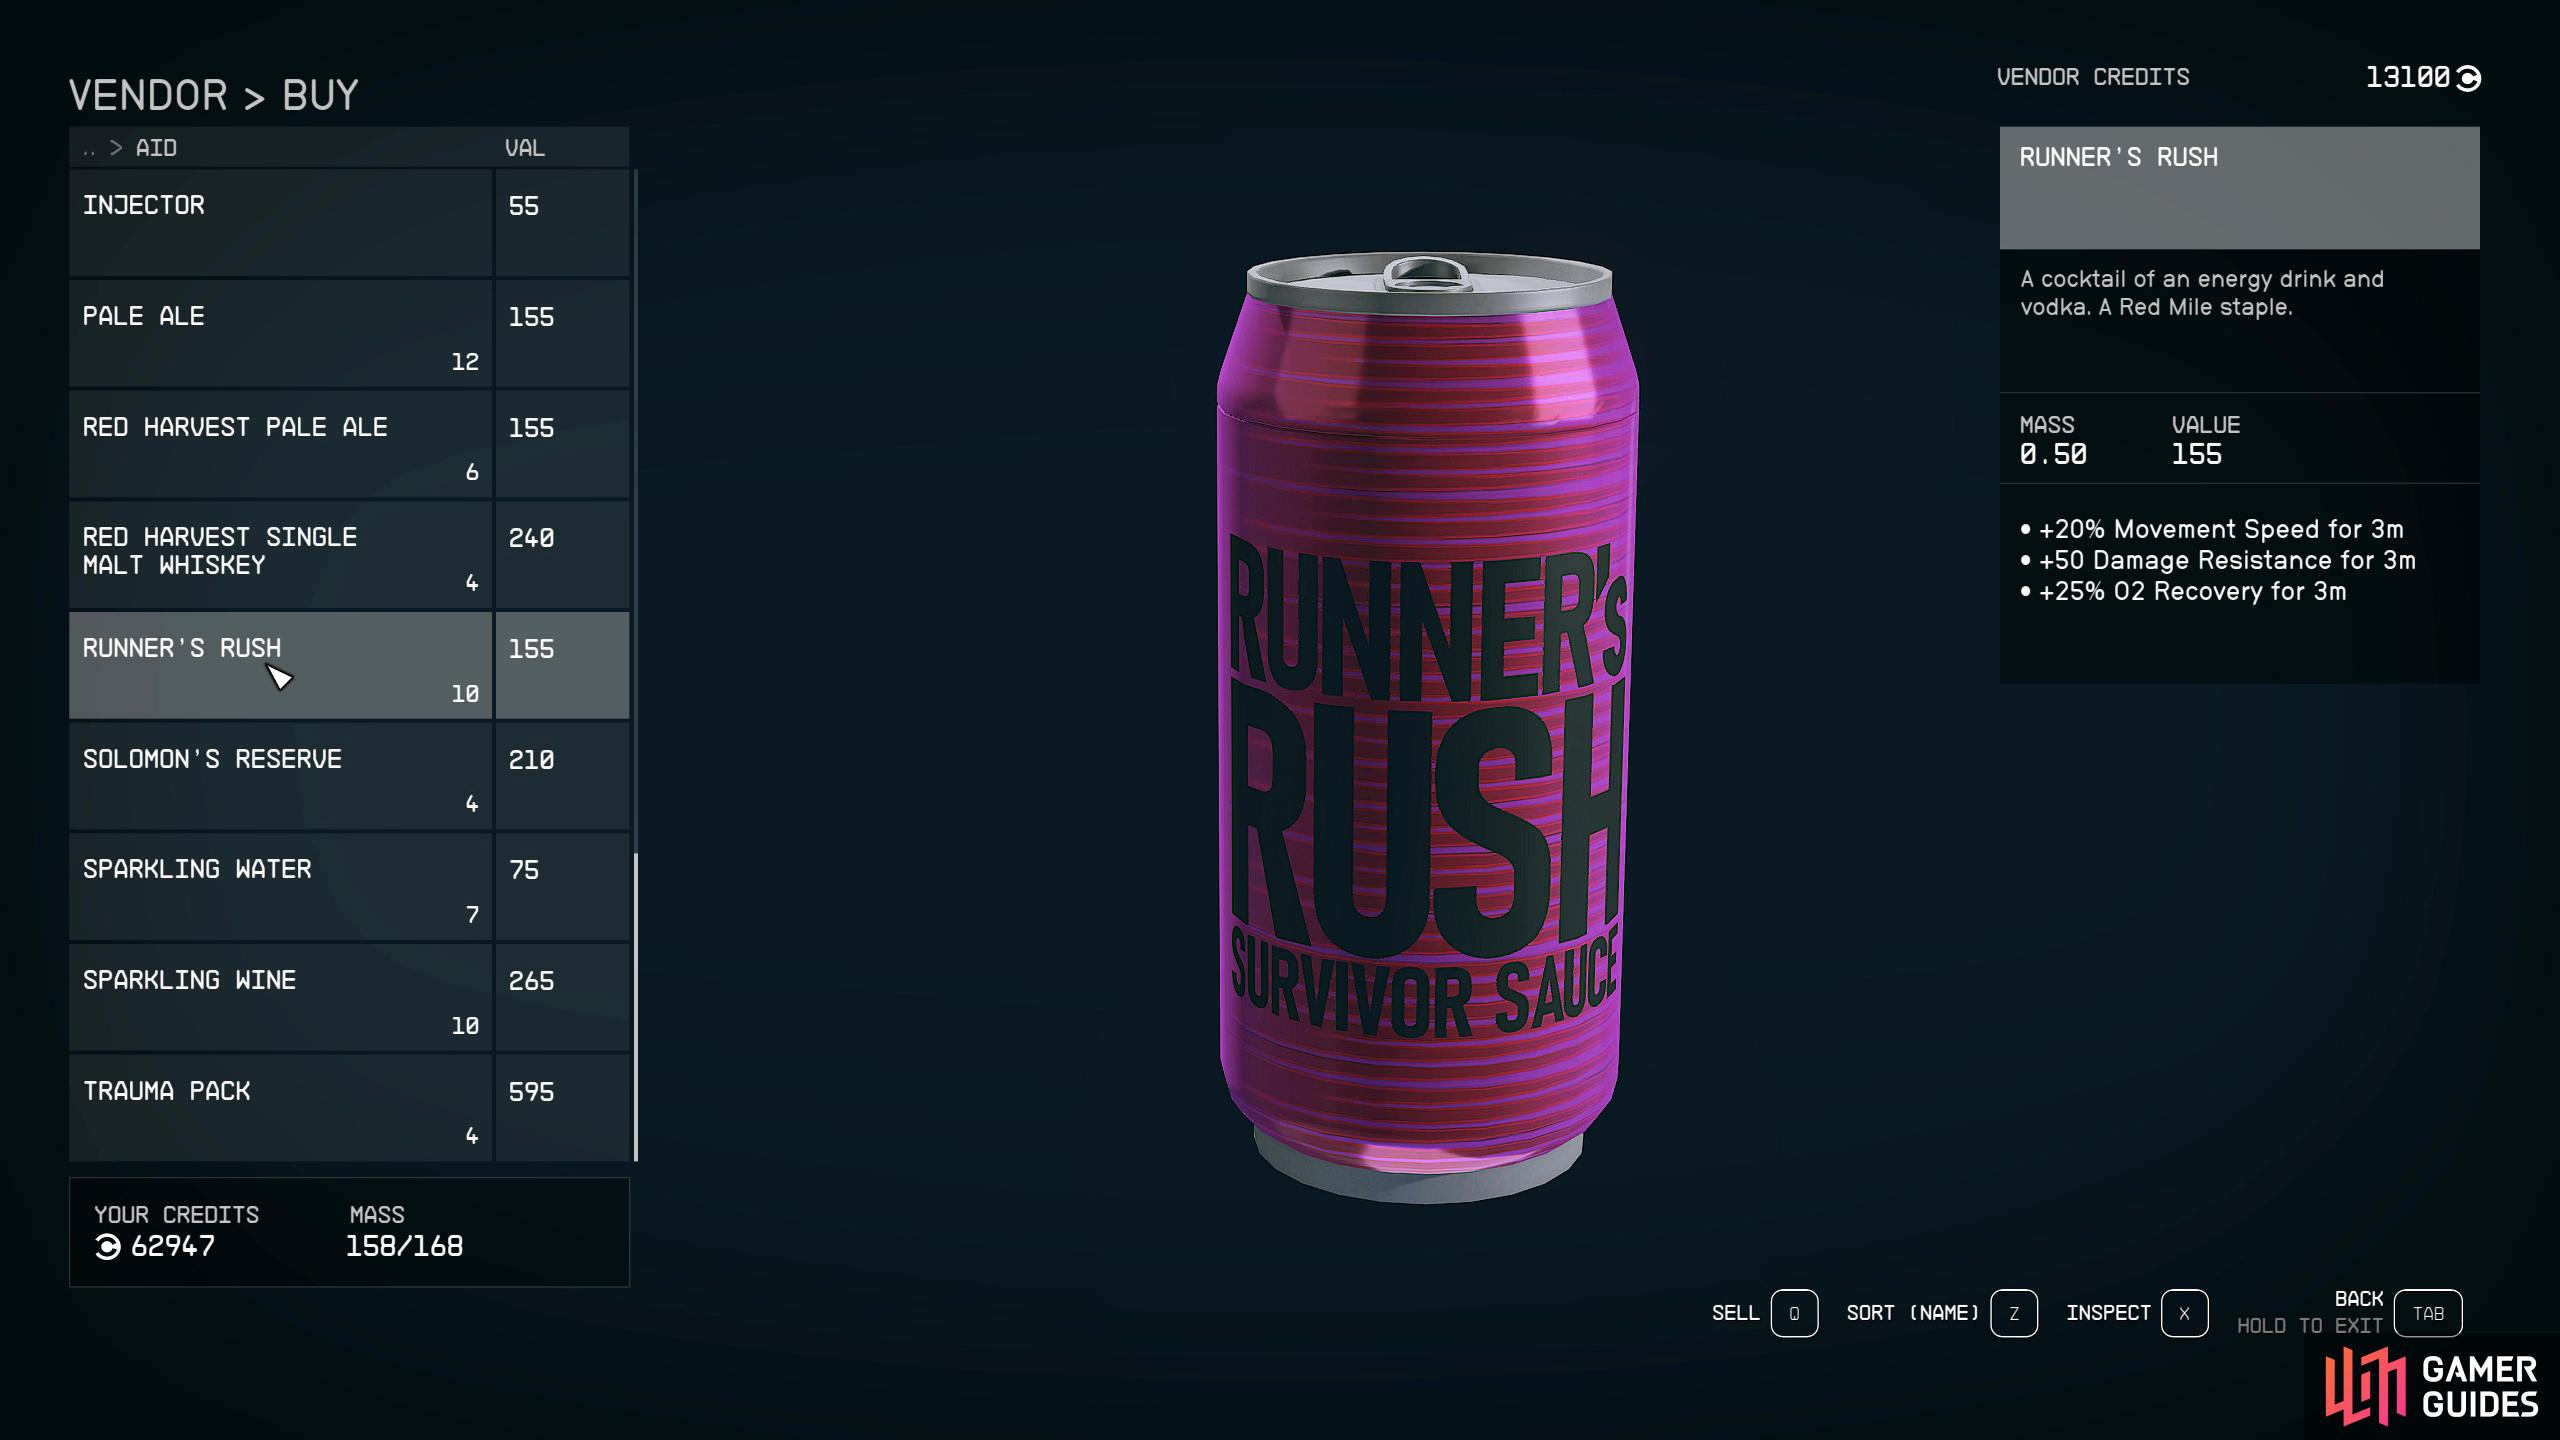 Make sure to purchase some Runner's Rush from the bar to help with the mission.